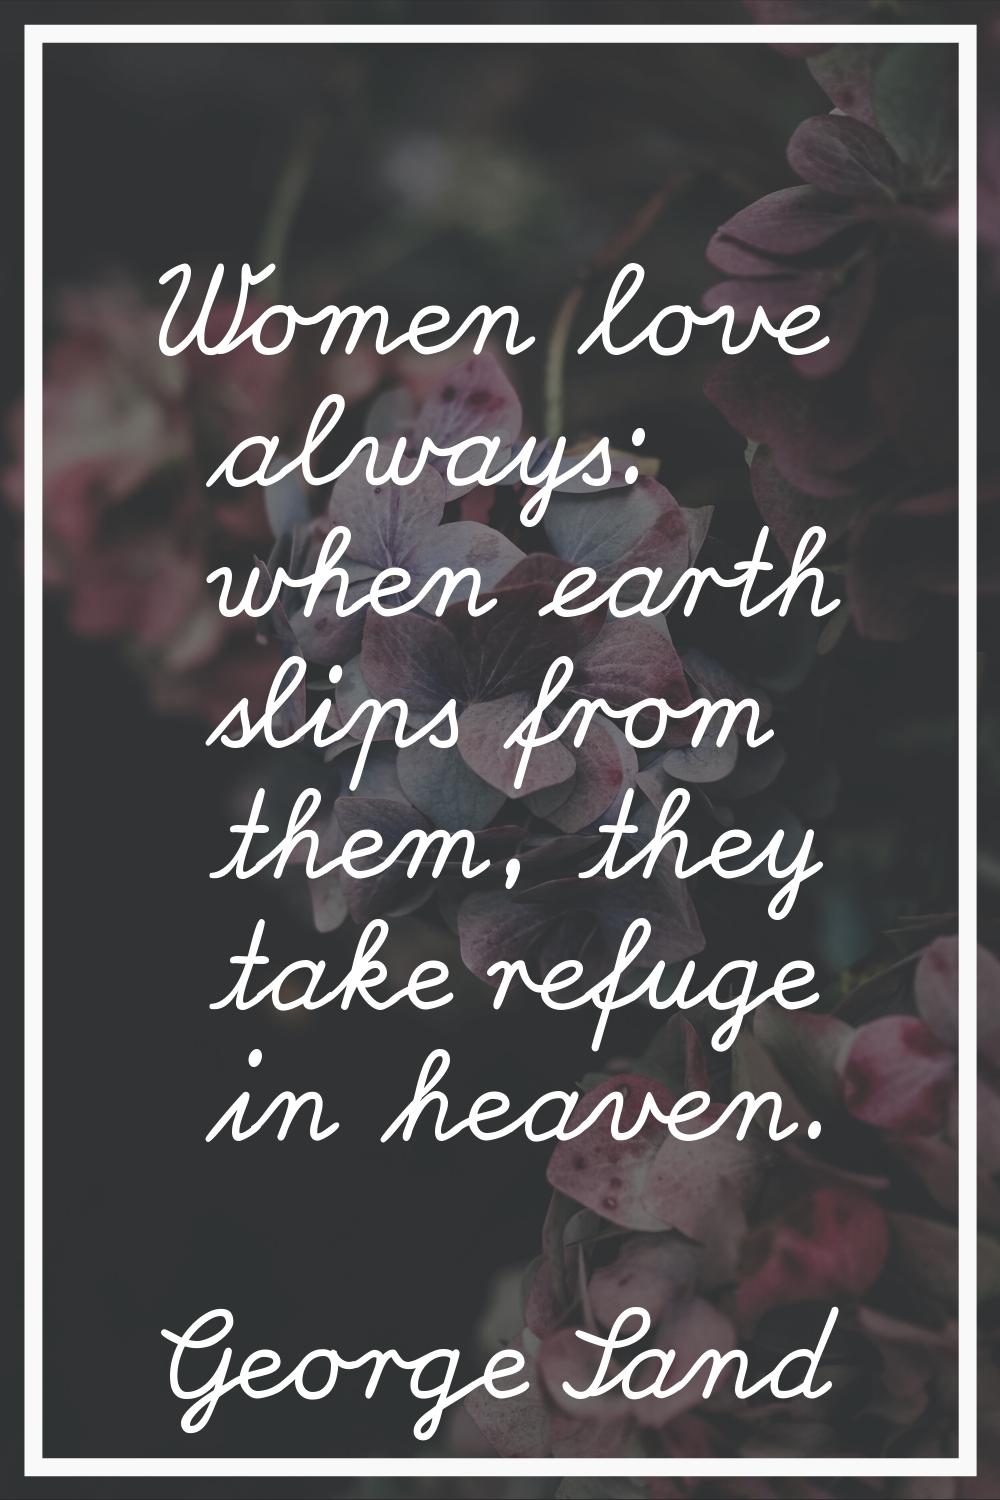 Women love always: when earth slips from them, they take refuge in heaven.